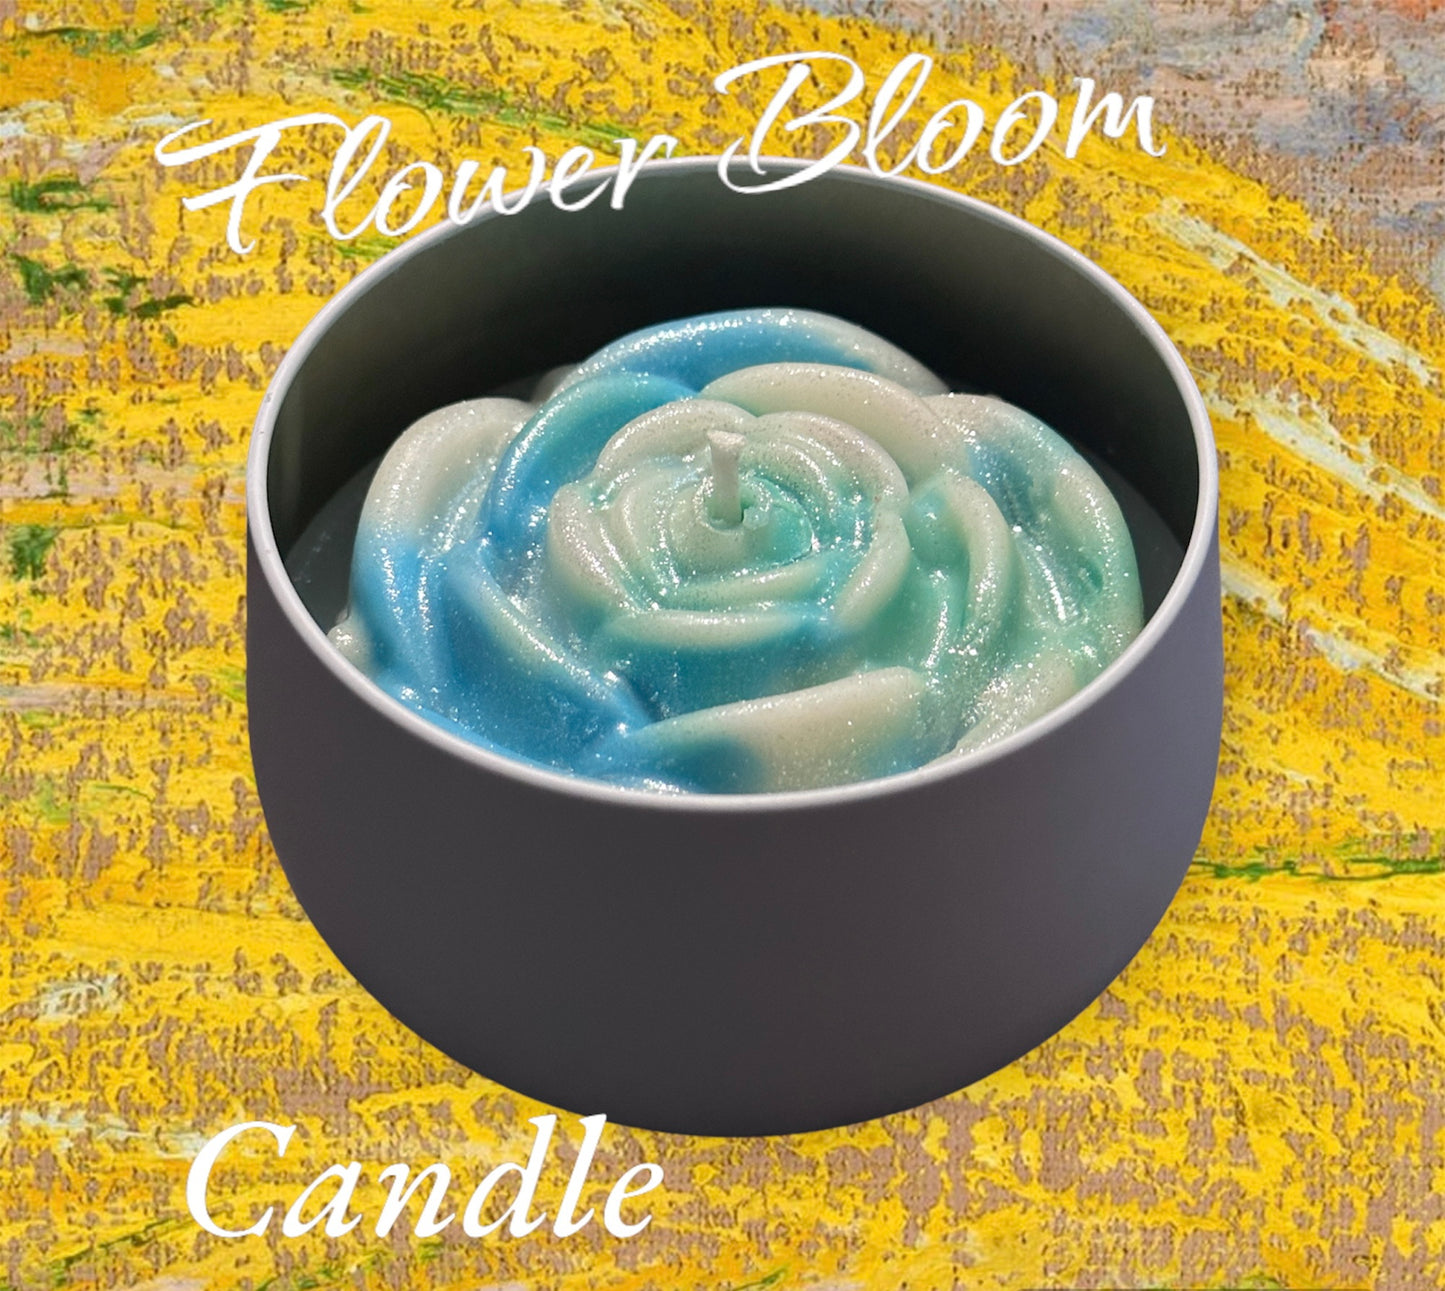 Flower Bloom Soy Wax Candle